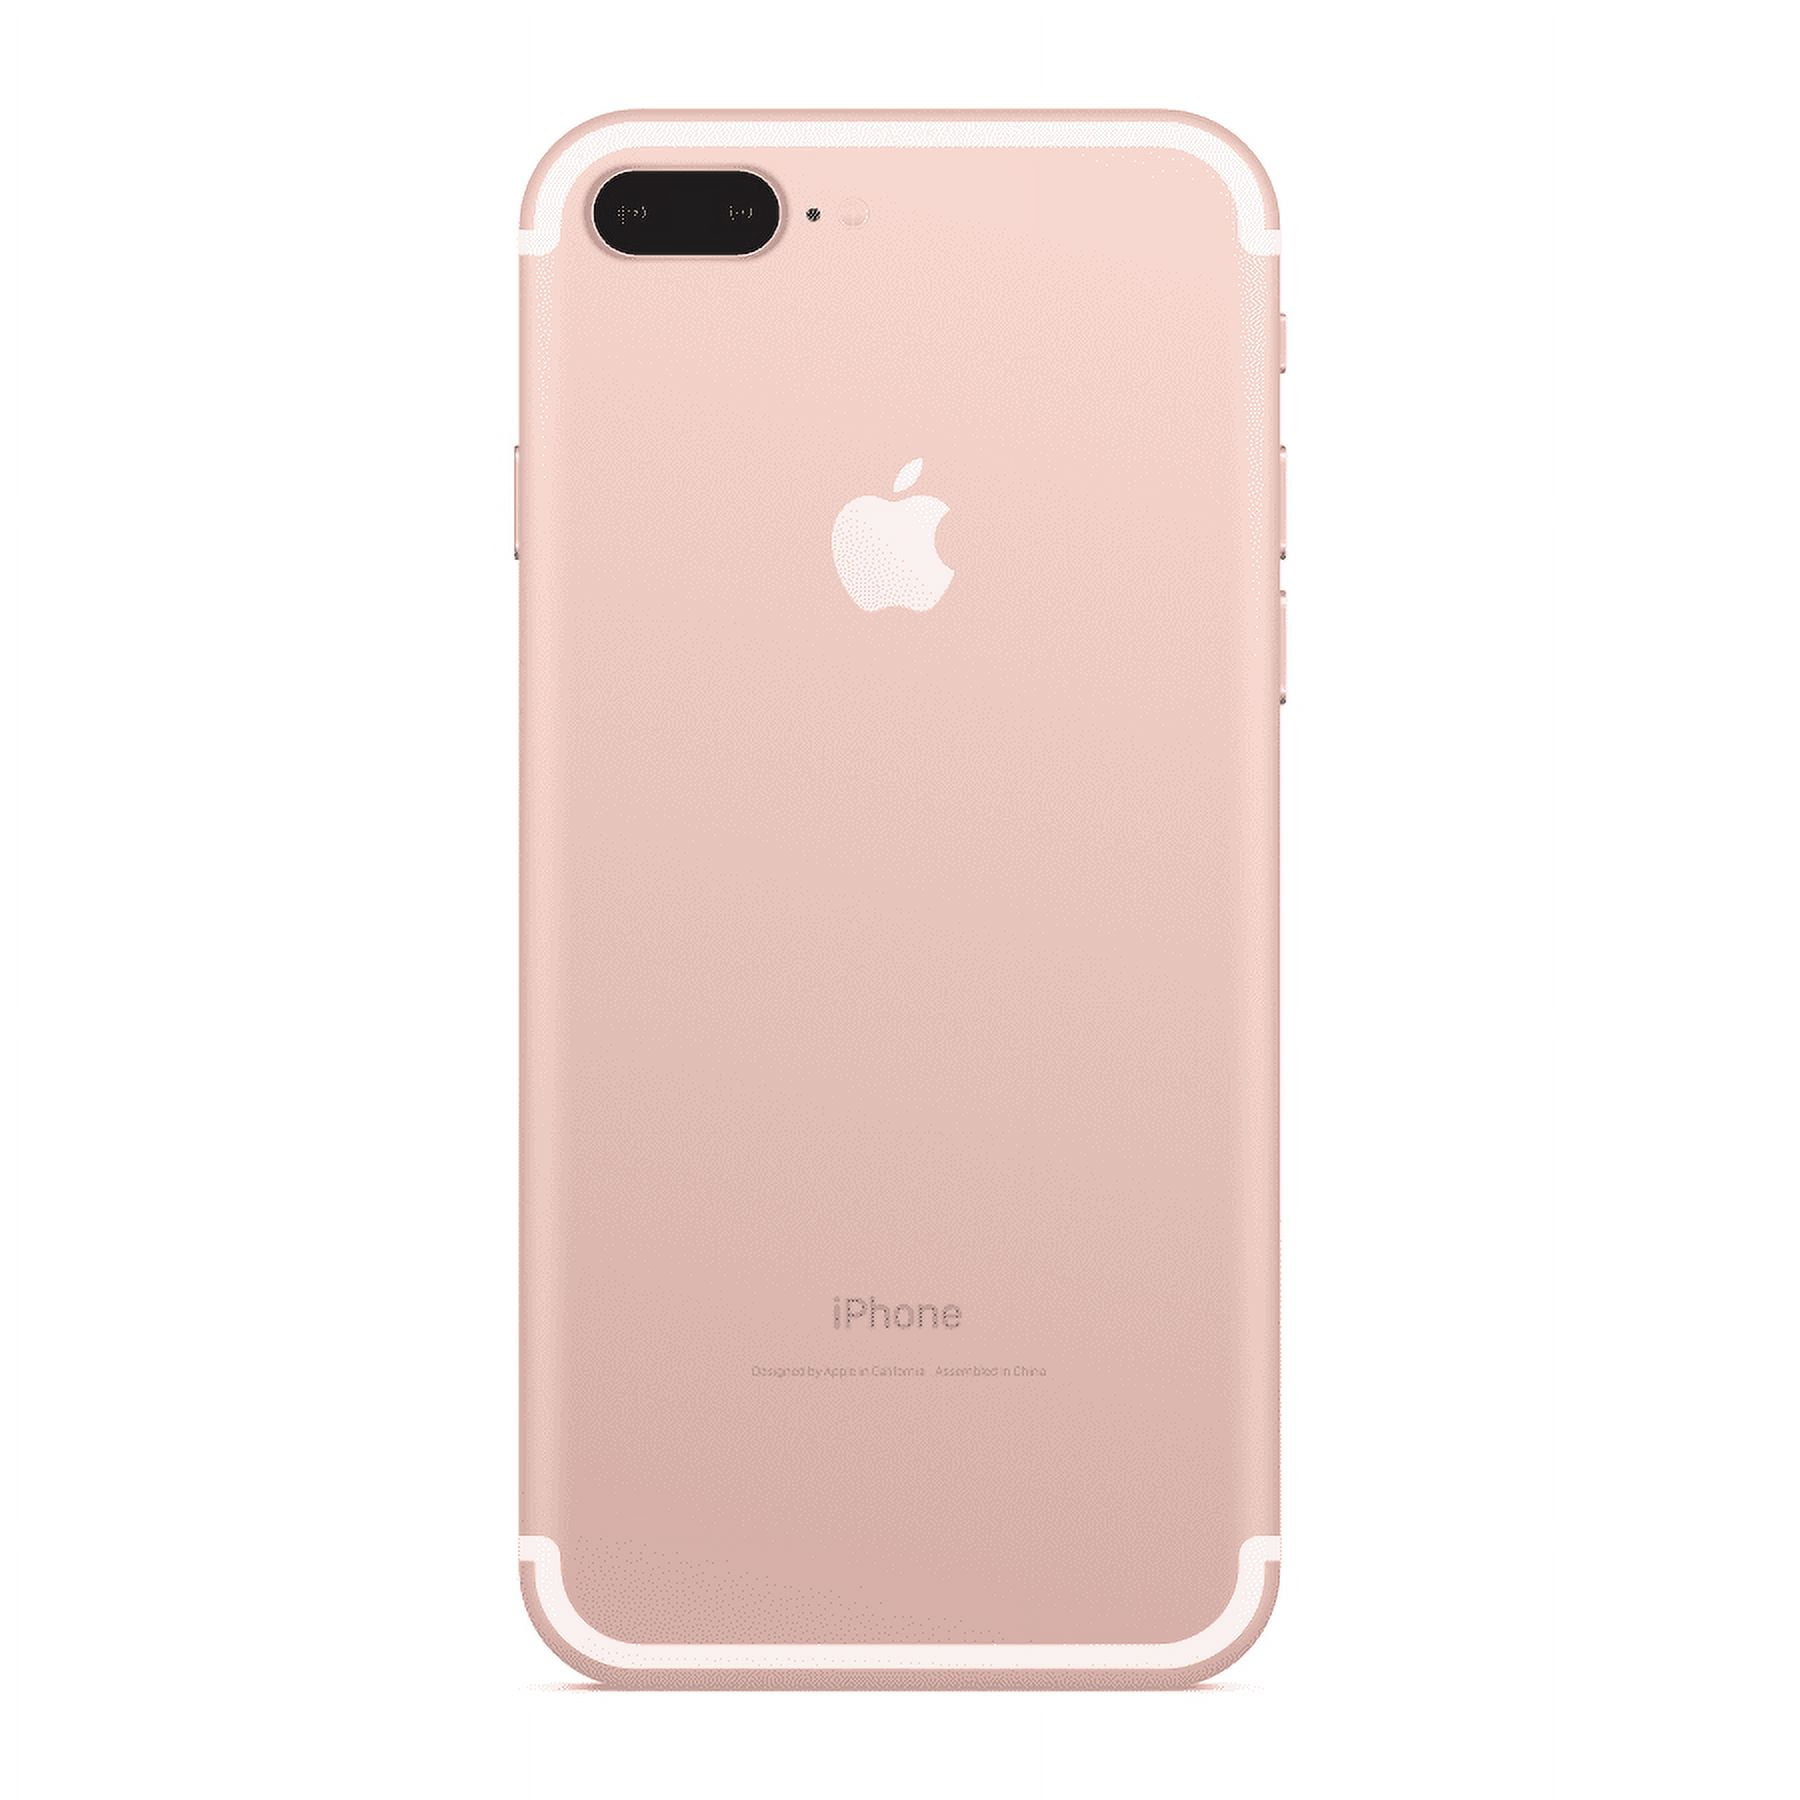 Pre-Owned Apple iPhone 7 Plus 32GB Rose Gold Fully Unlocked (No